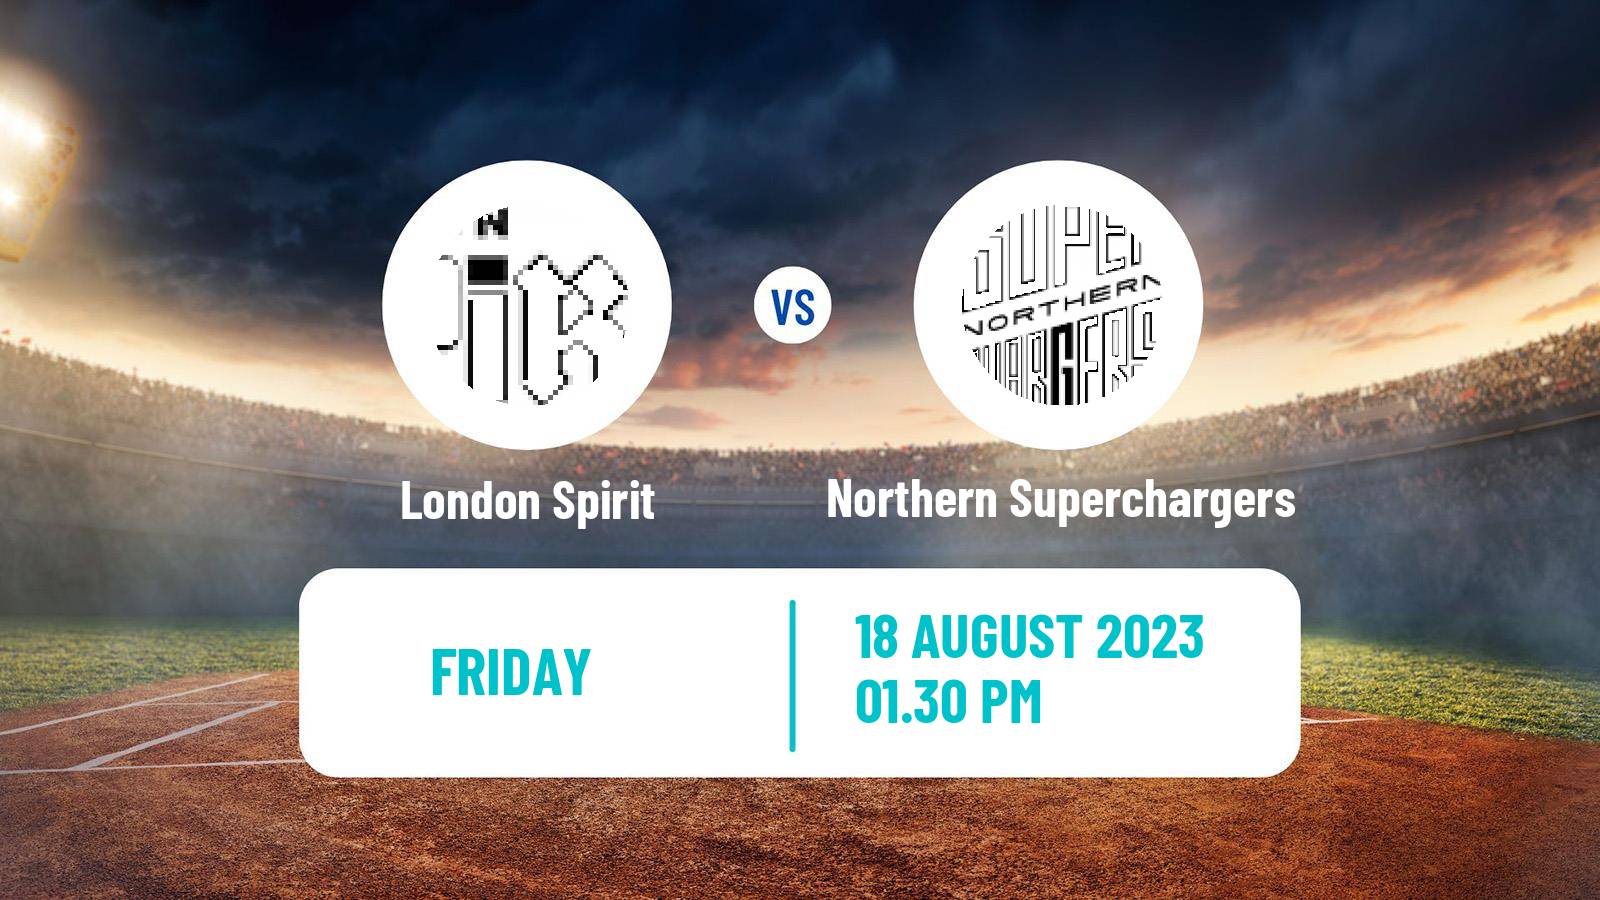 Cricket United Kingdom The Hundred Cricket London Spirit - Northern Superchargers